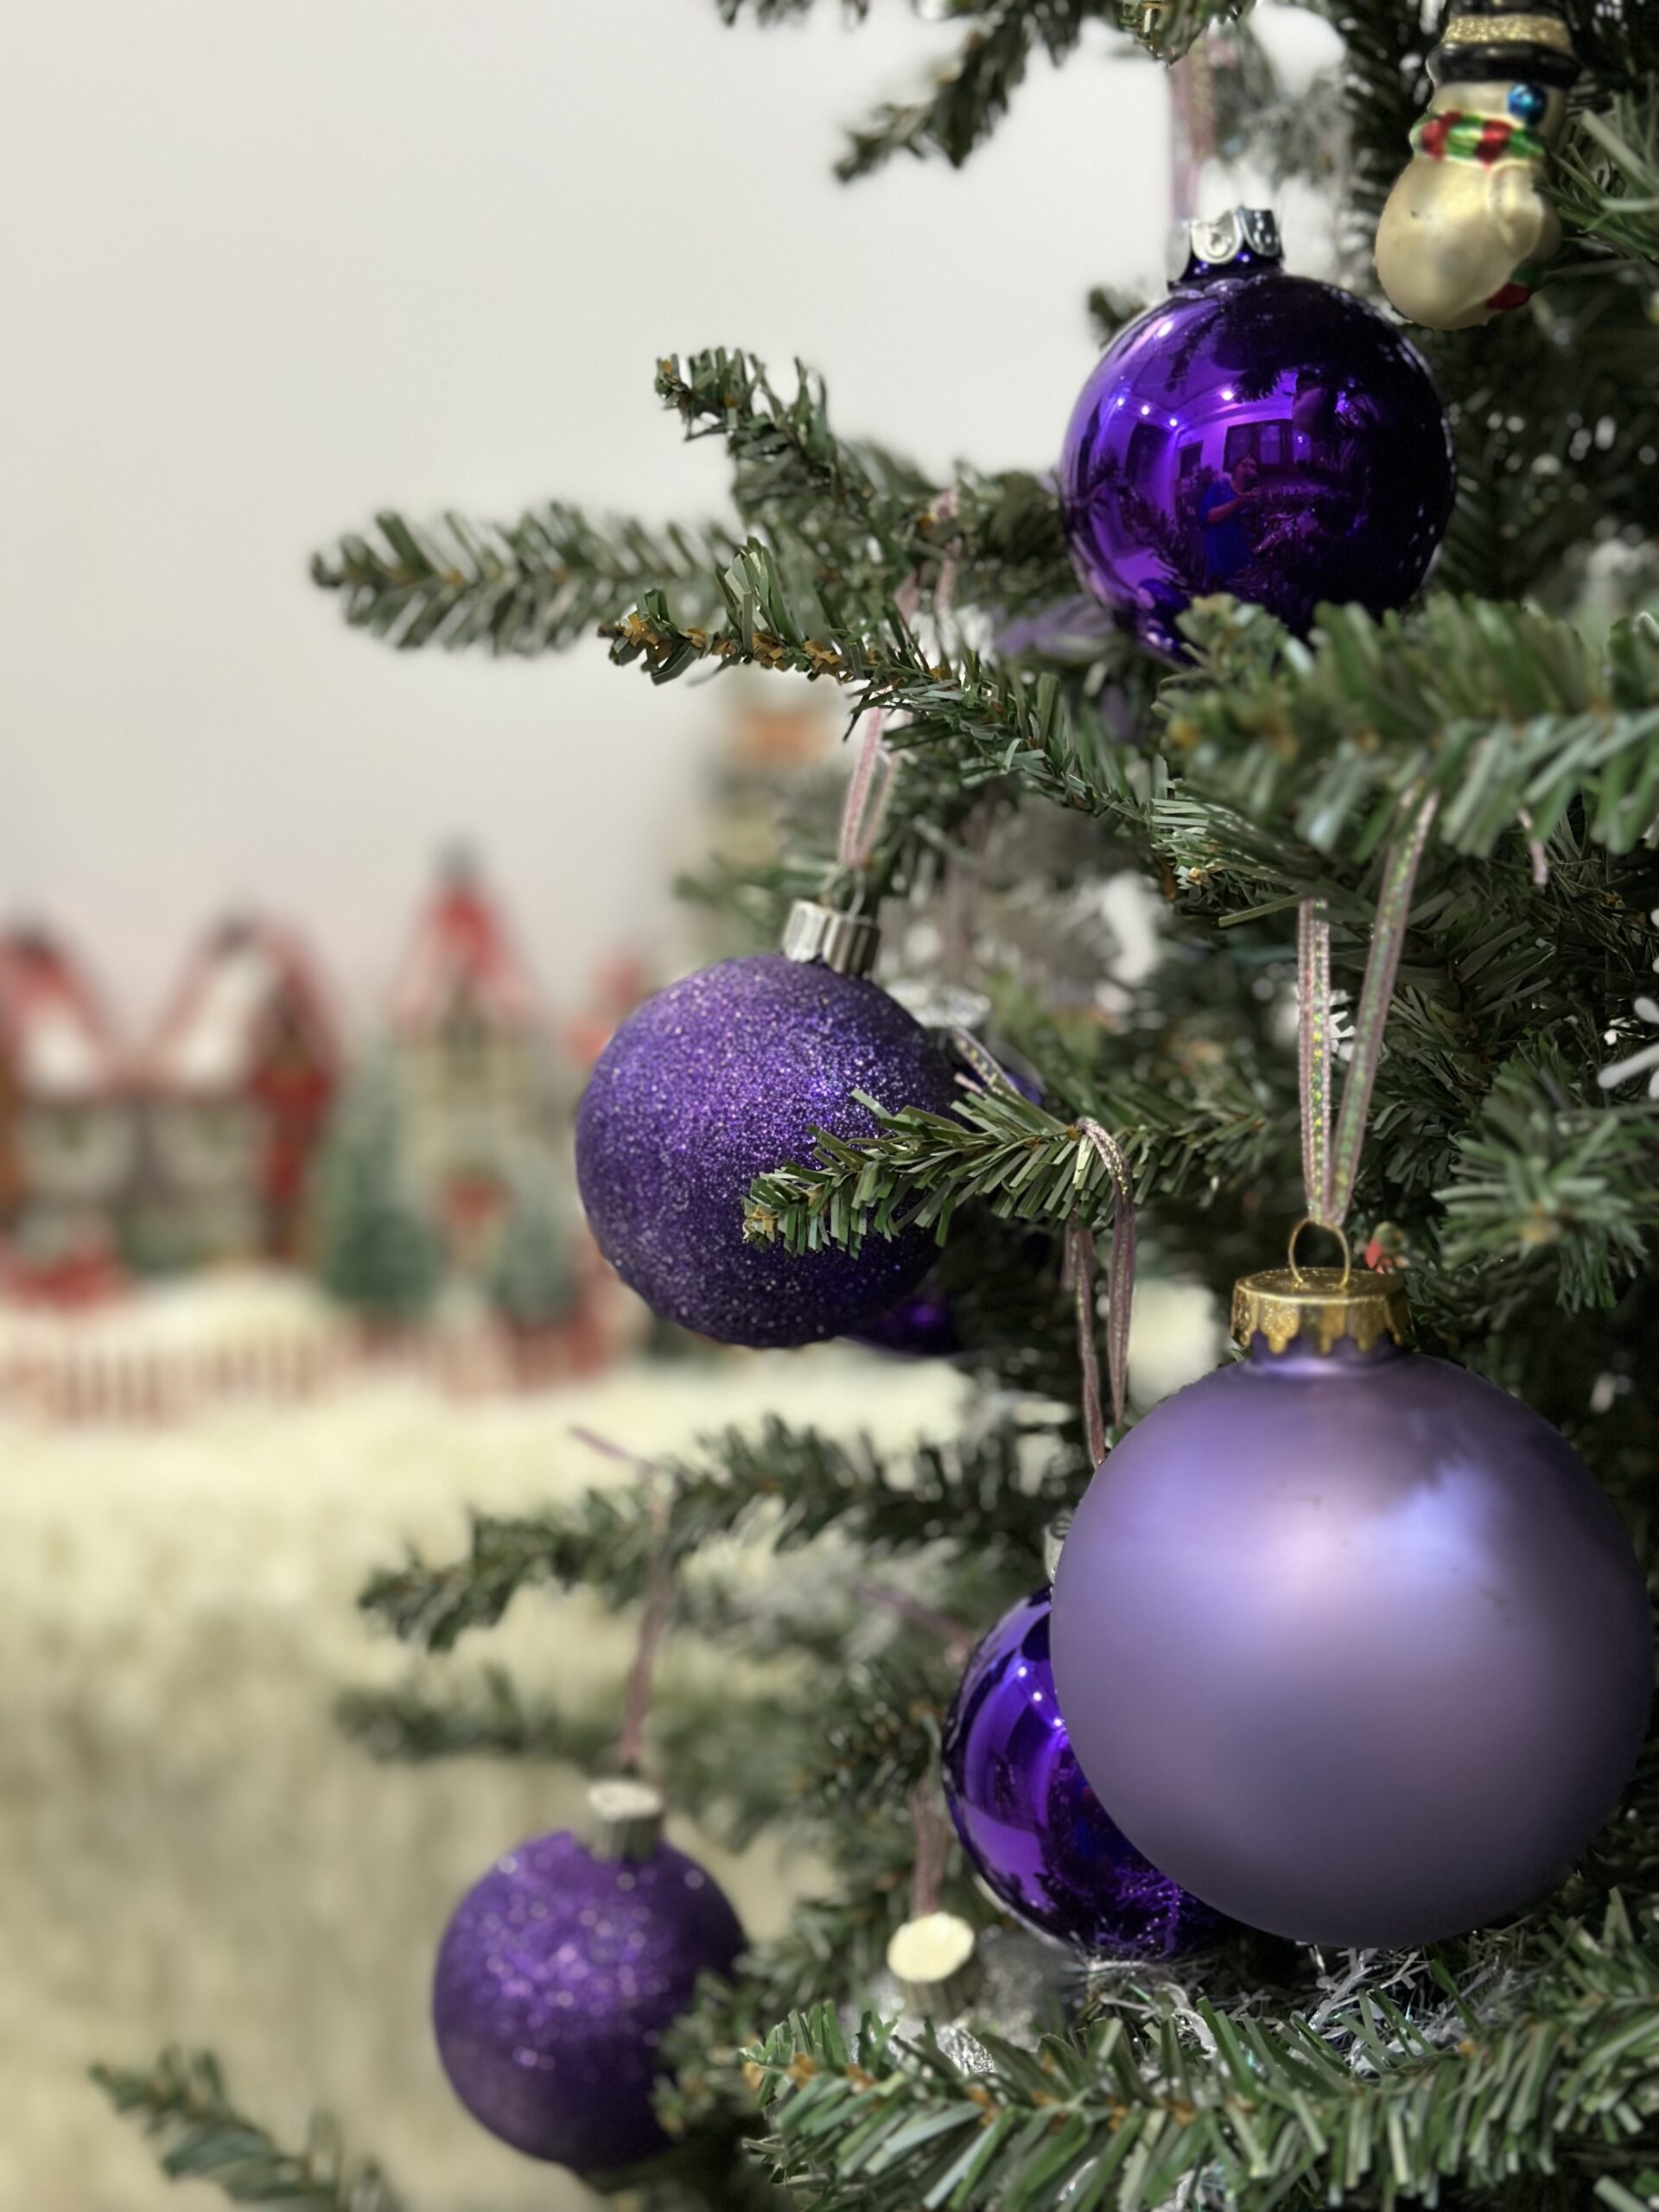 My Christmas tree in purple and silver